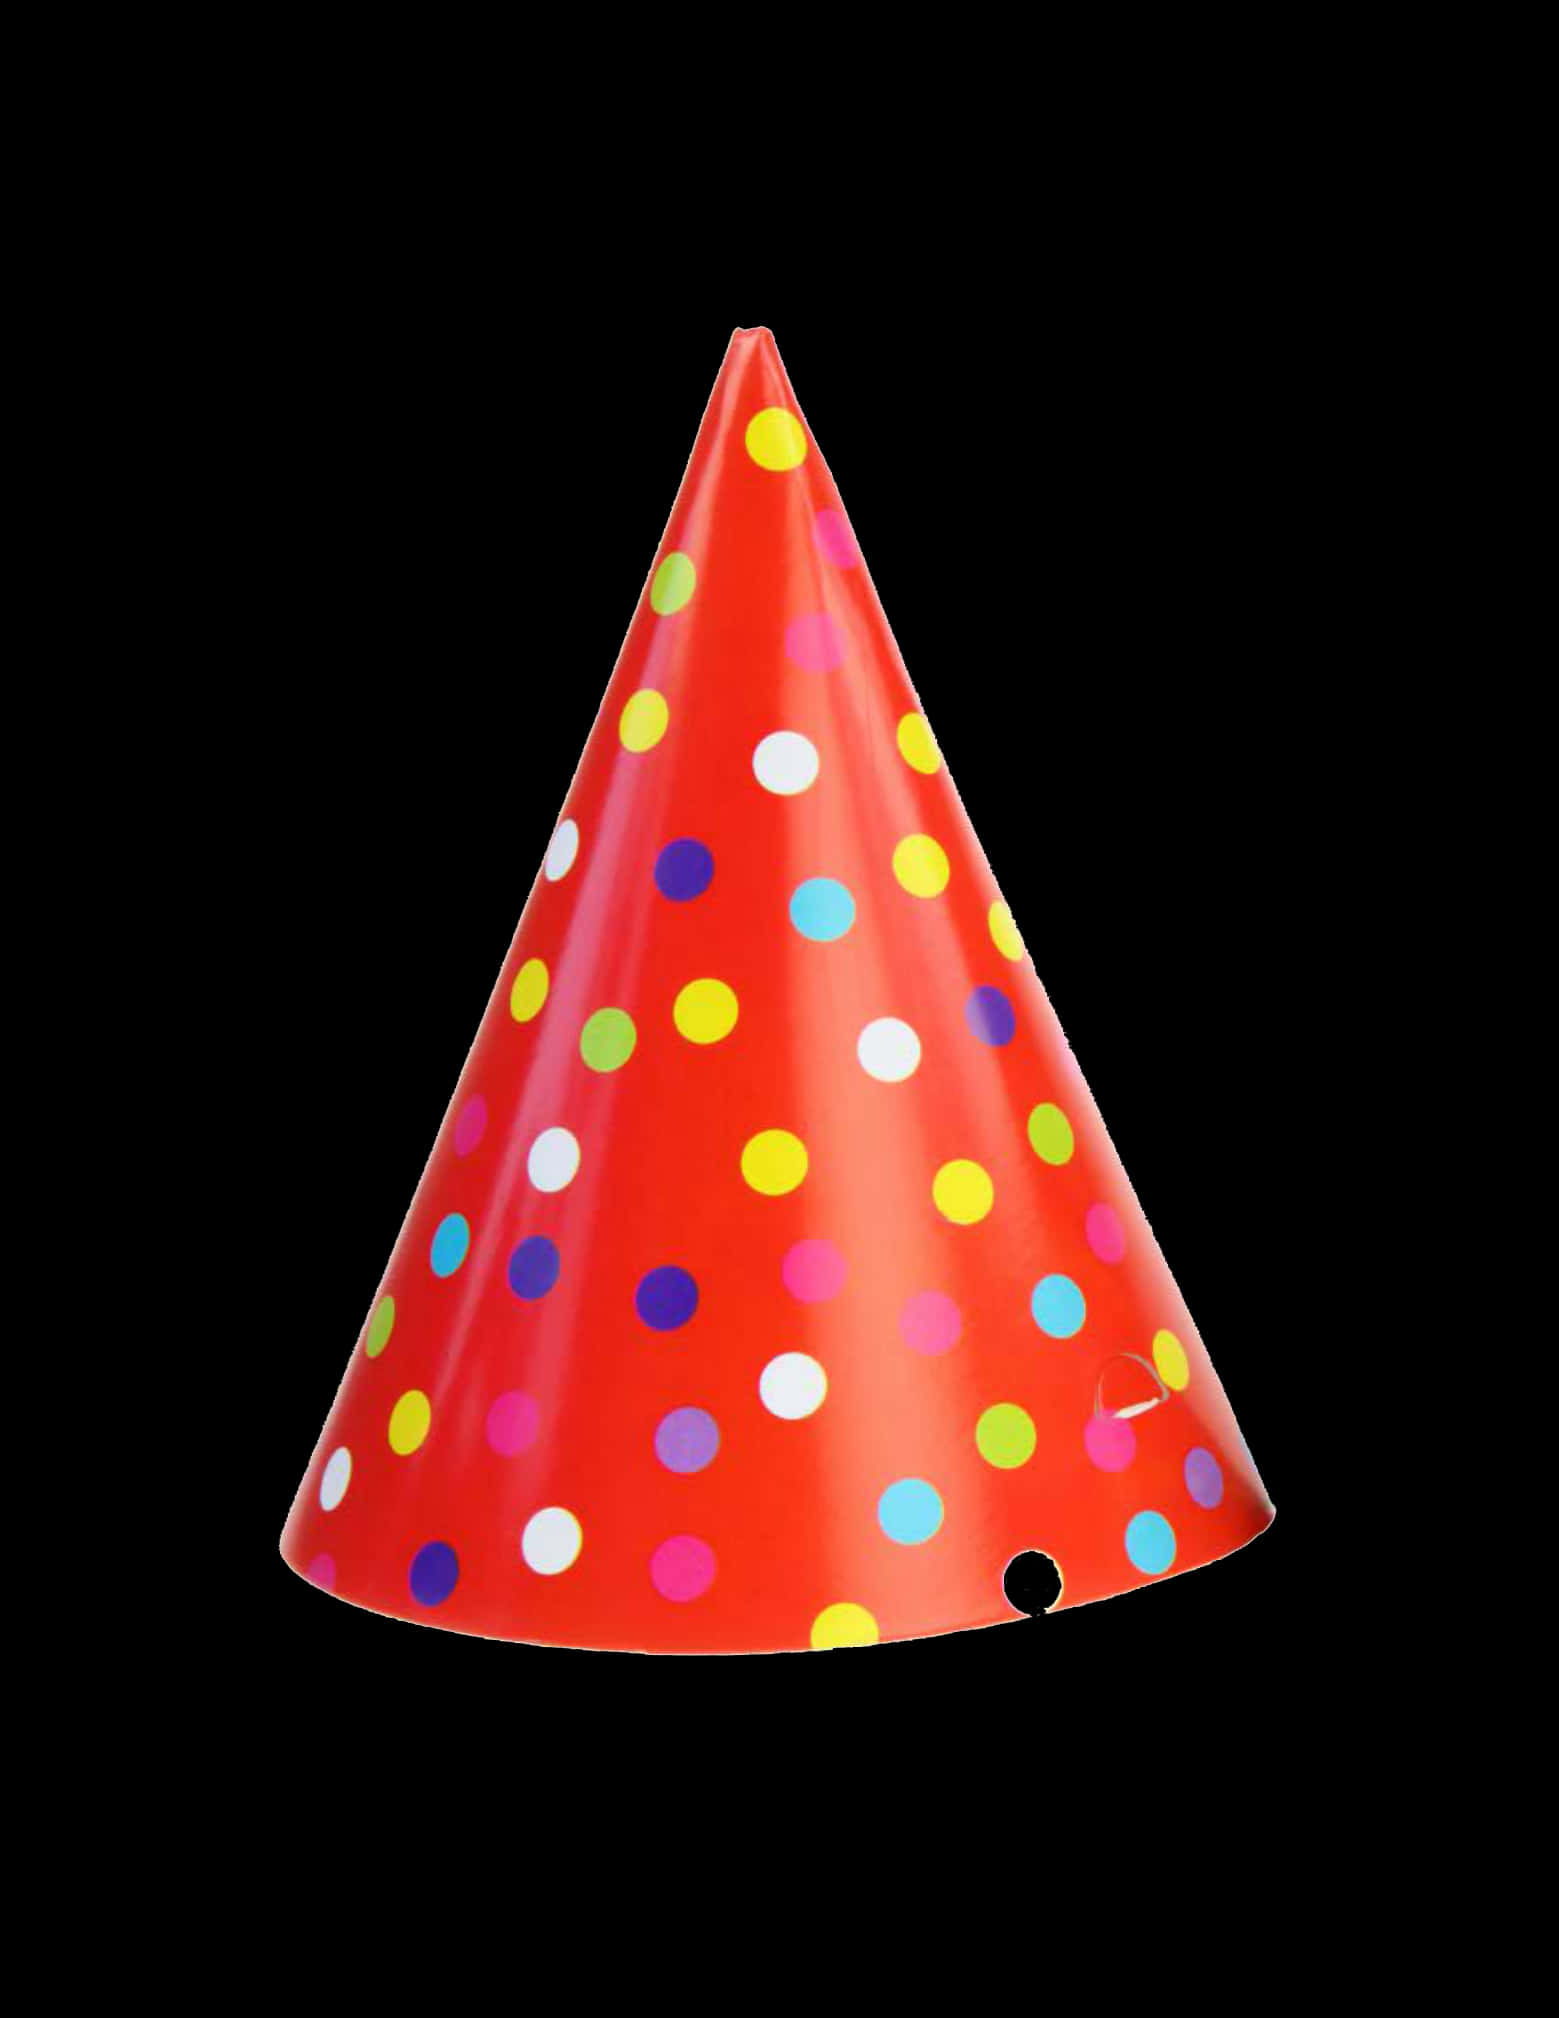 A Red Cone With Colorful Polka Dots